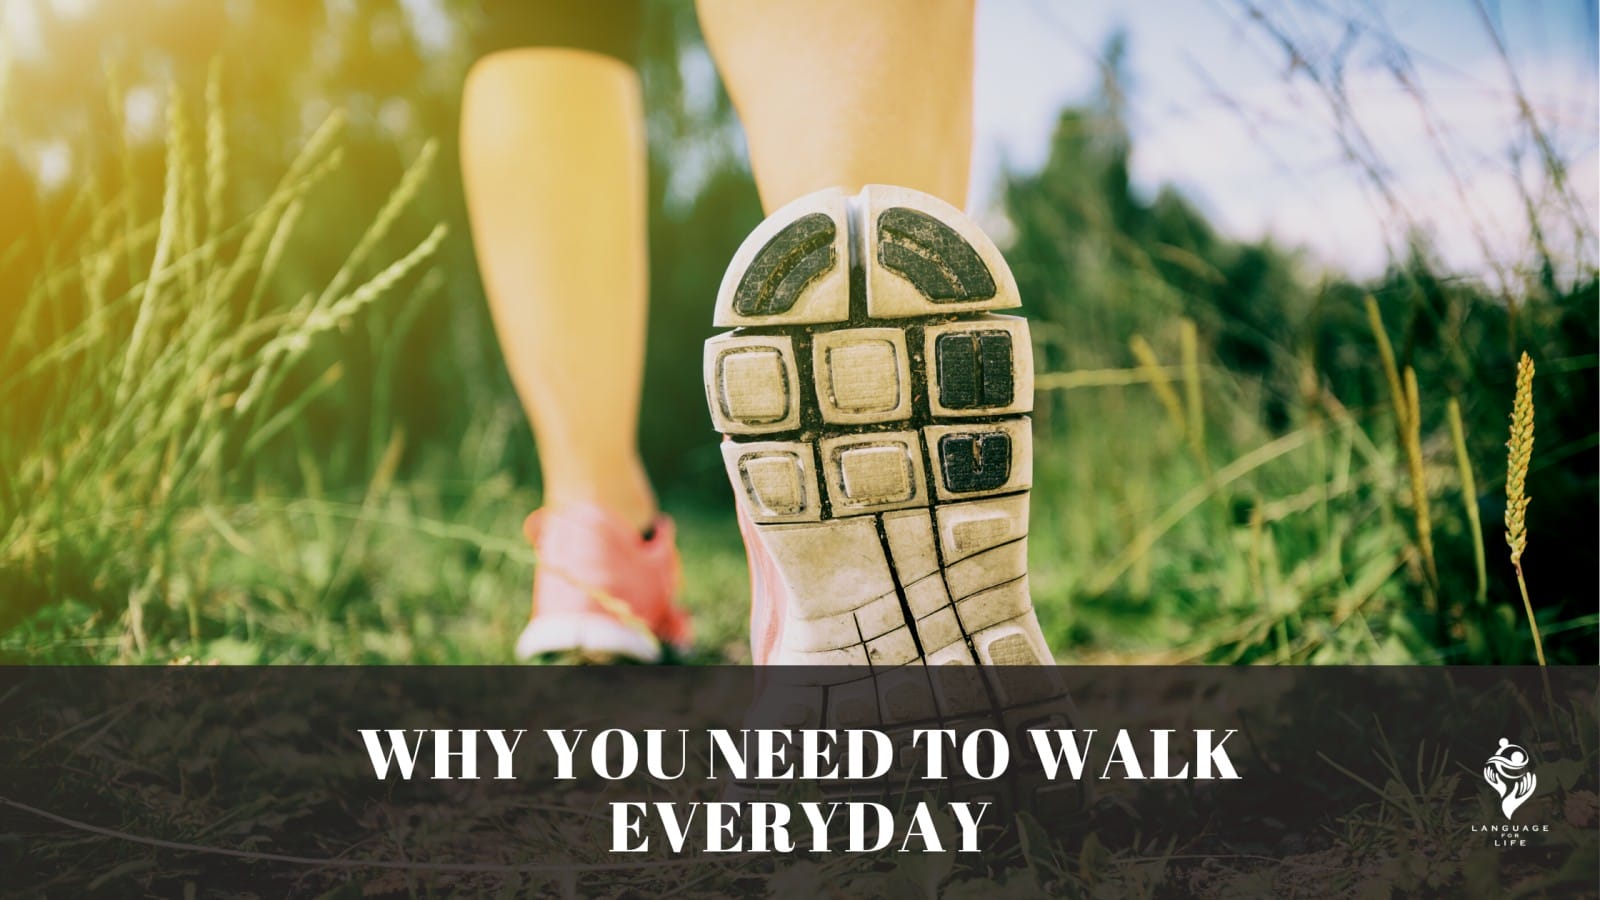 Walk everyday, Why you need it ?